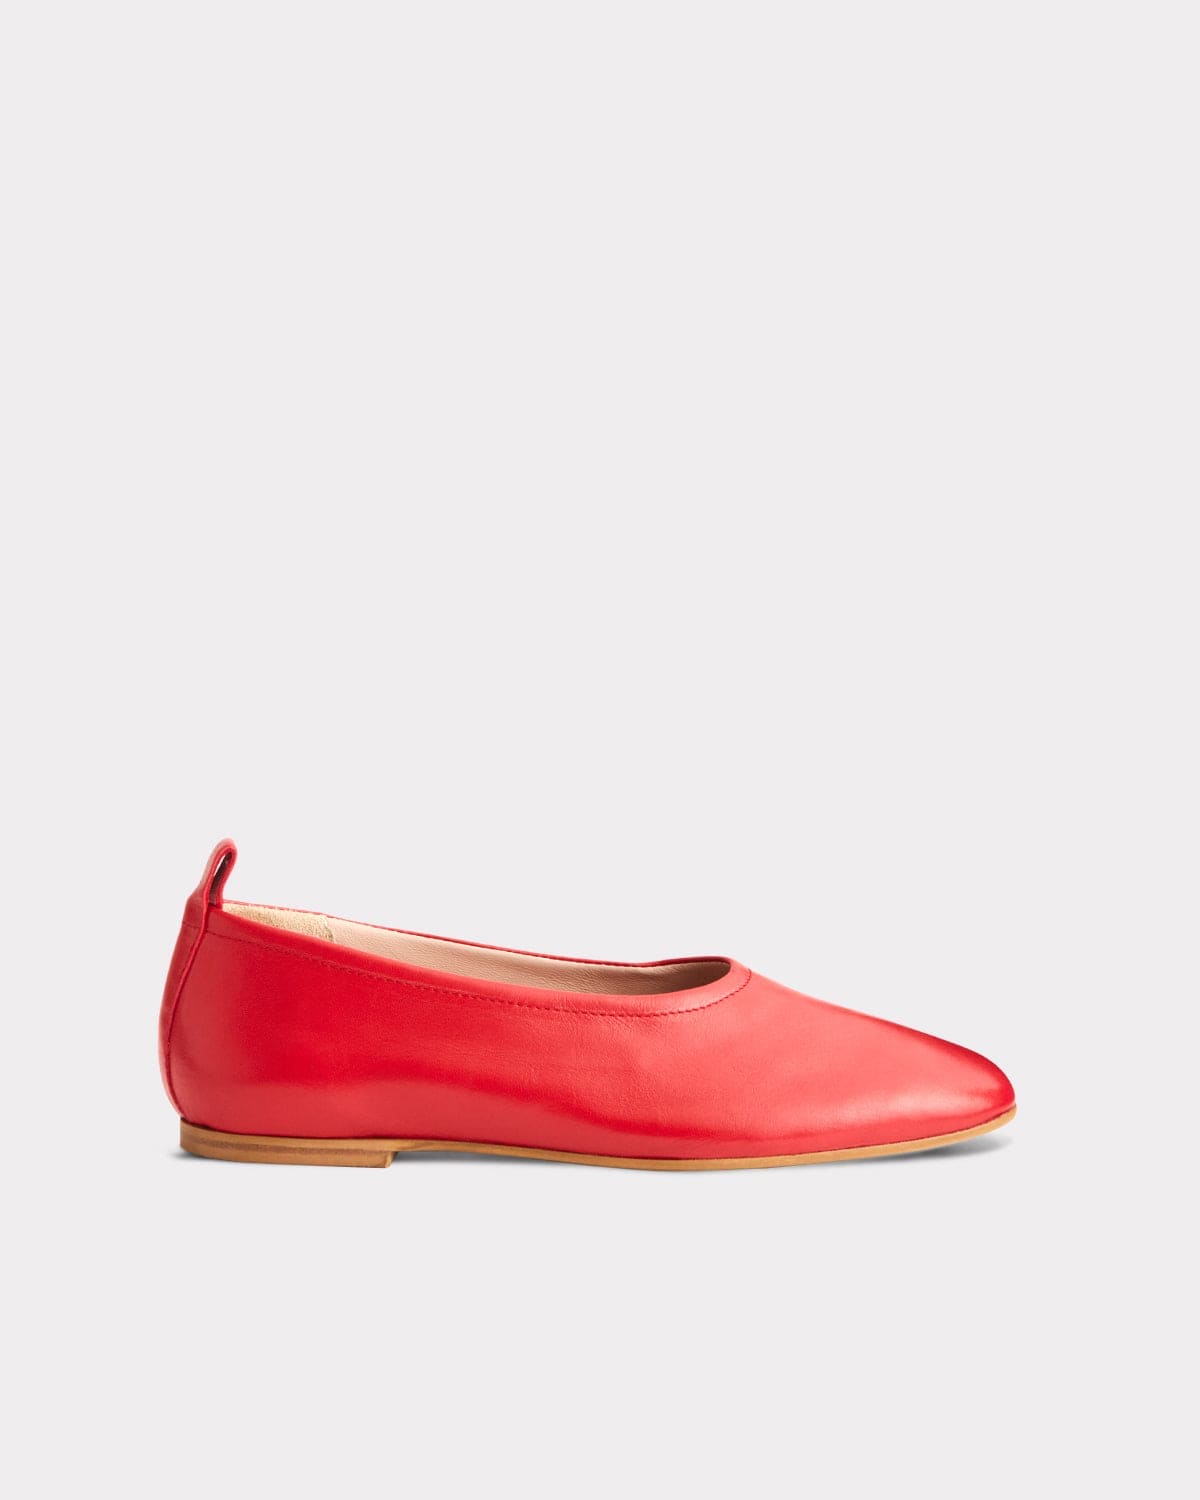 The Foundation Flat - Red